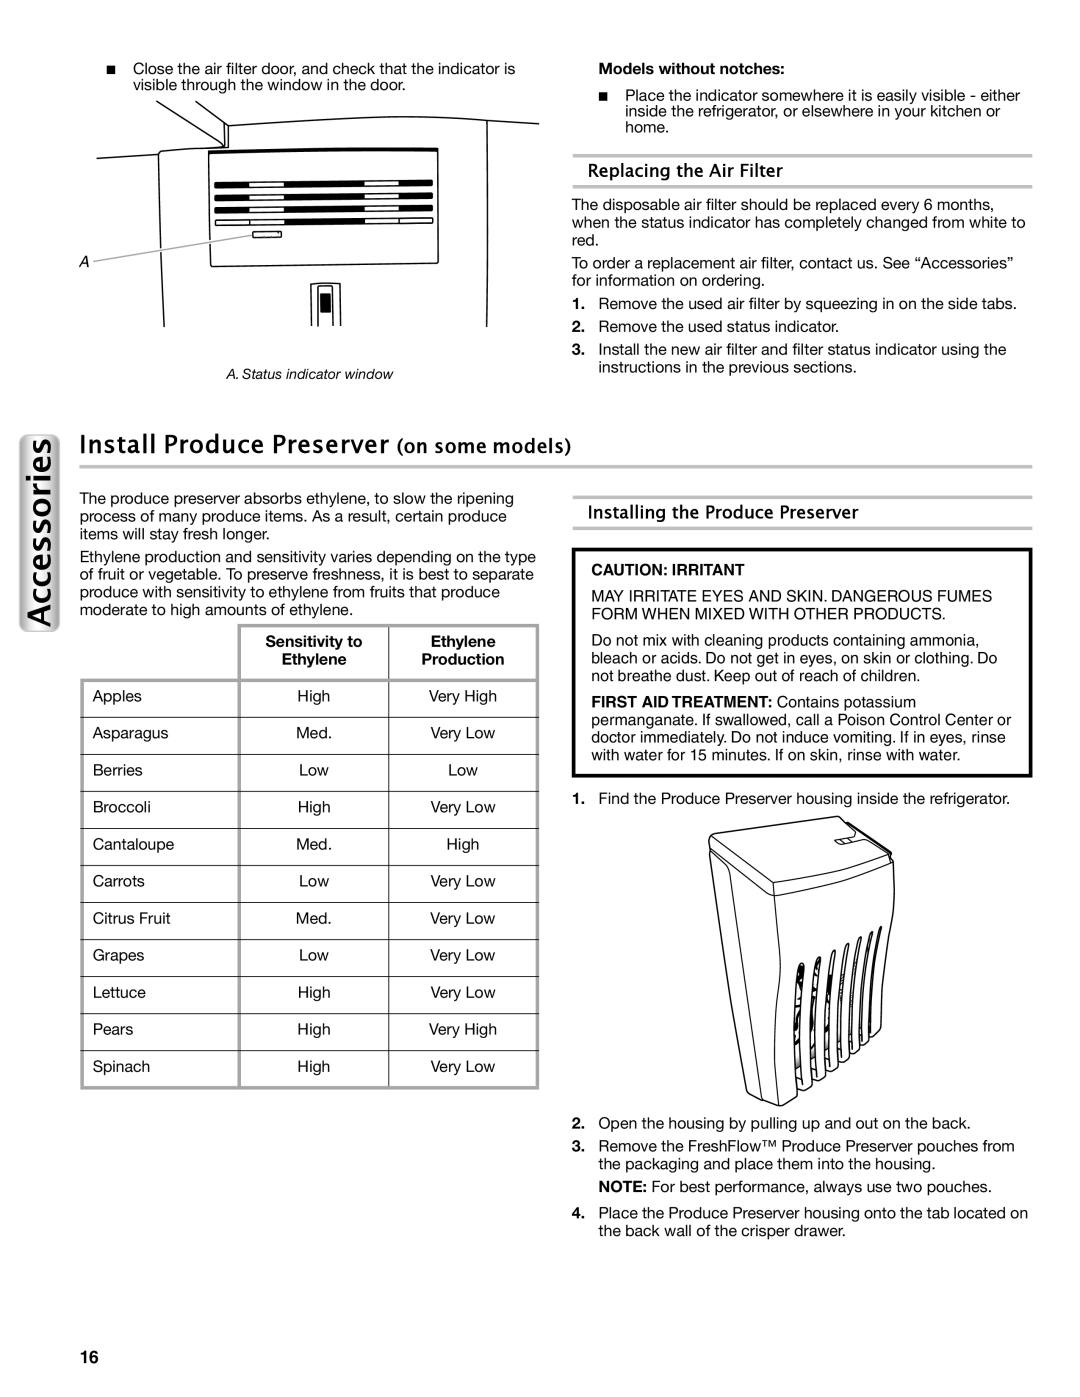 Maytag W10558103A Install Produce Preserver on some models, Replacing the Air Filter, Installing the Produce Preserver 